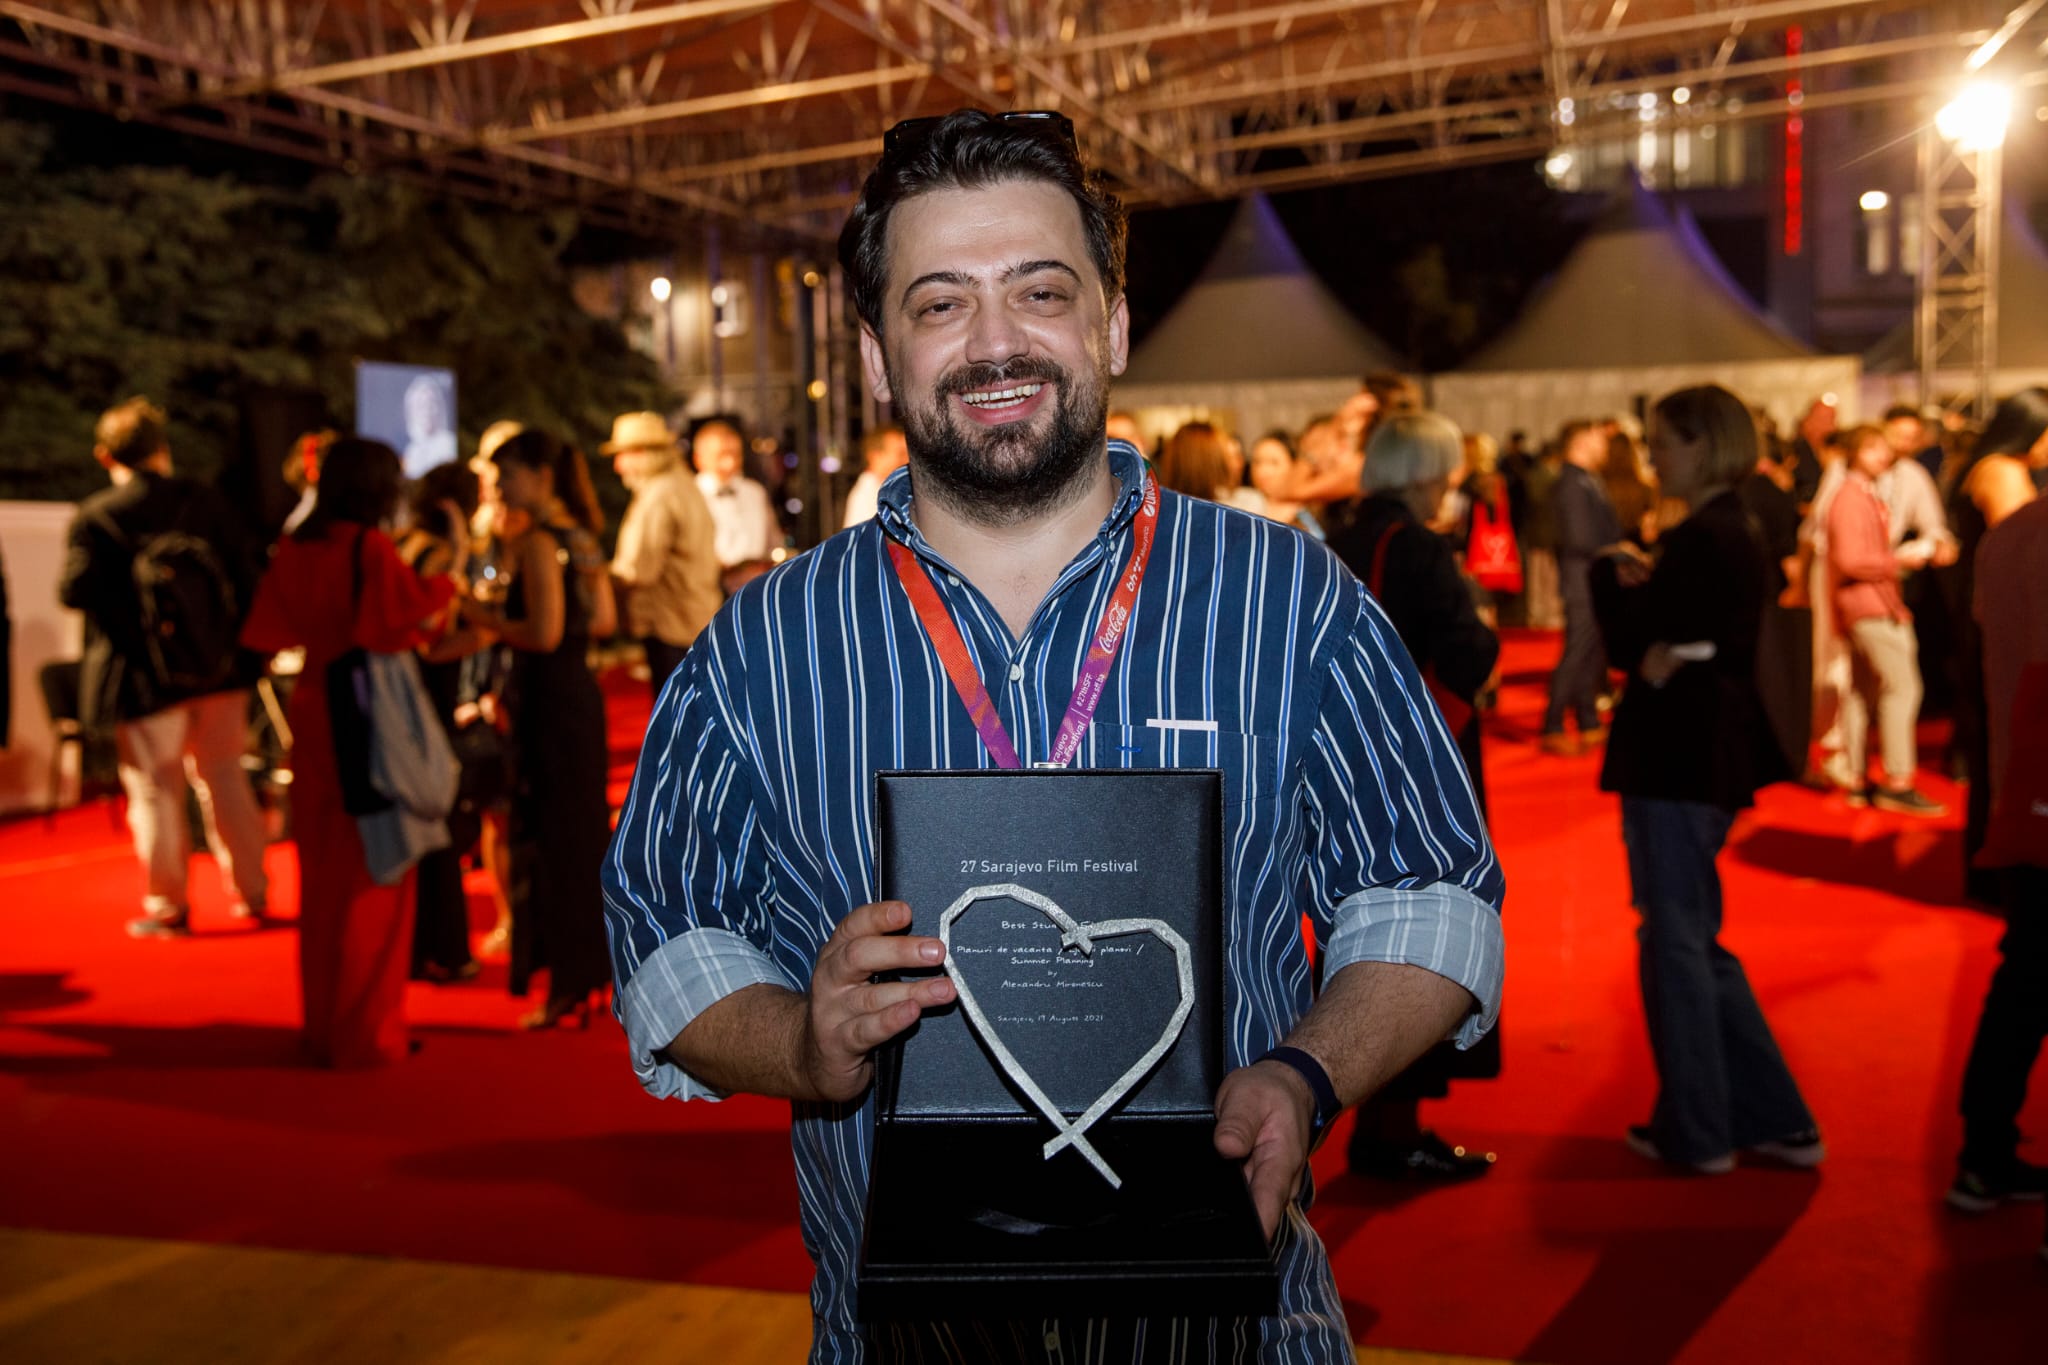 Alexandru Mironescu,young Romanian Director, wins Heart of Sarajevo for the Best Student Film with a movie Summer Planning, at the 27th Sarajevo Film Festival, Sarajevo, 19 August 2021. (Photo: Alma Arslanagic-Pozder) 